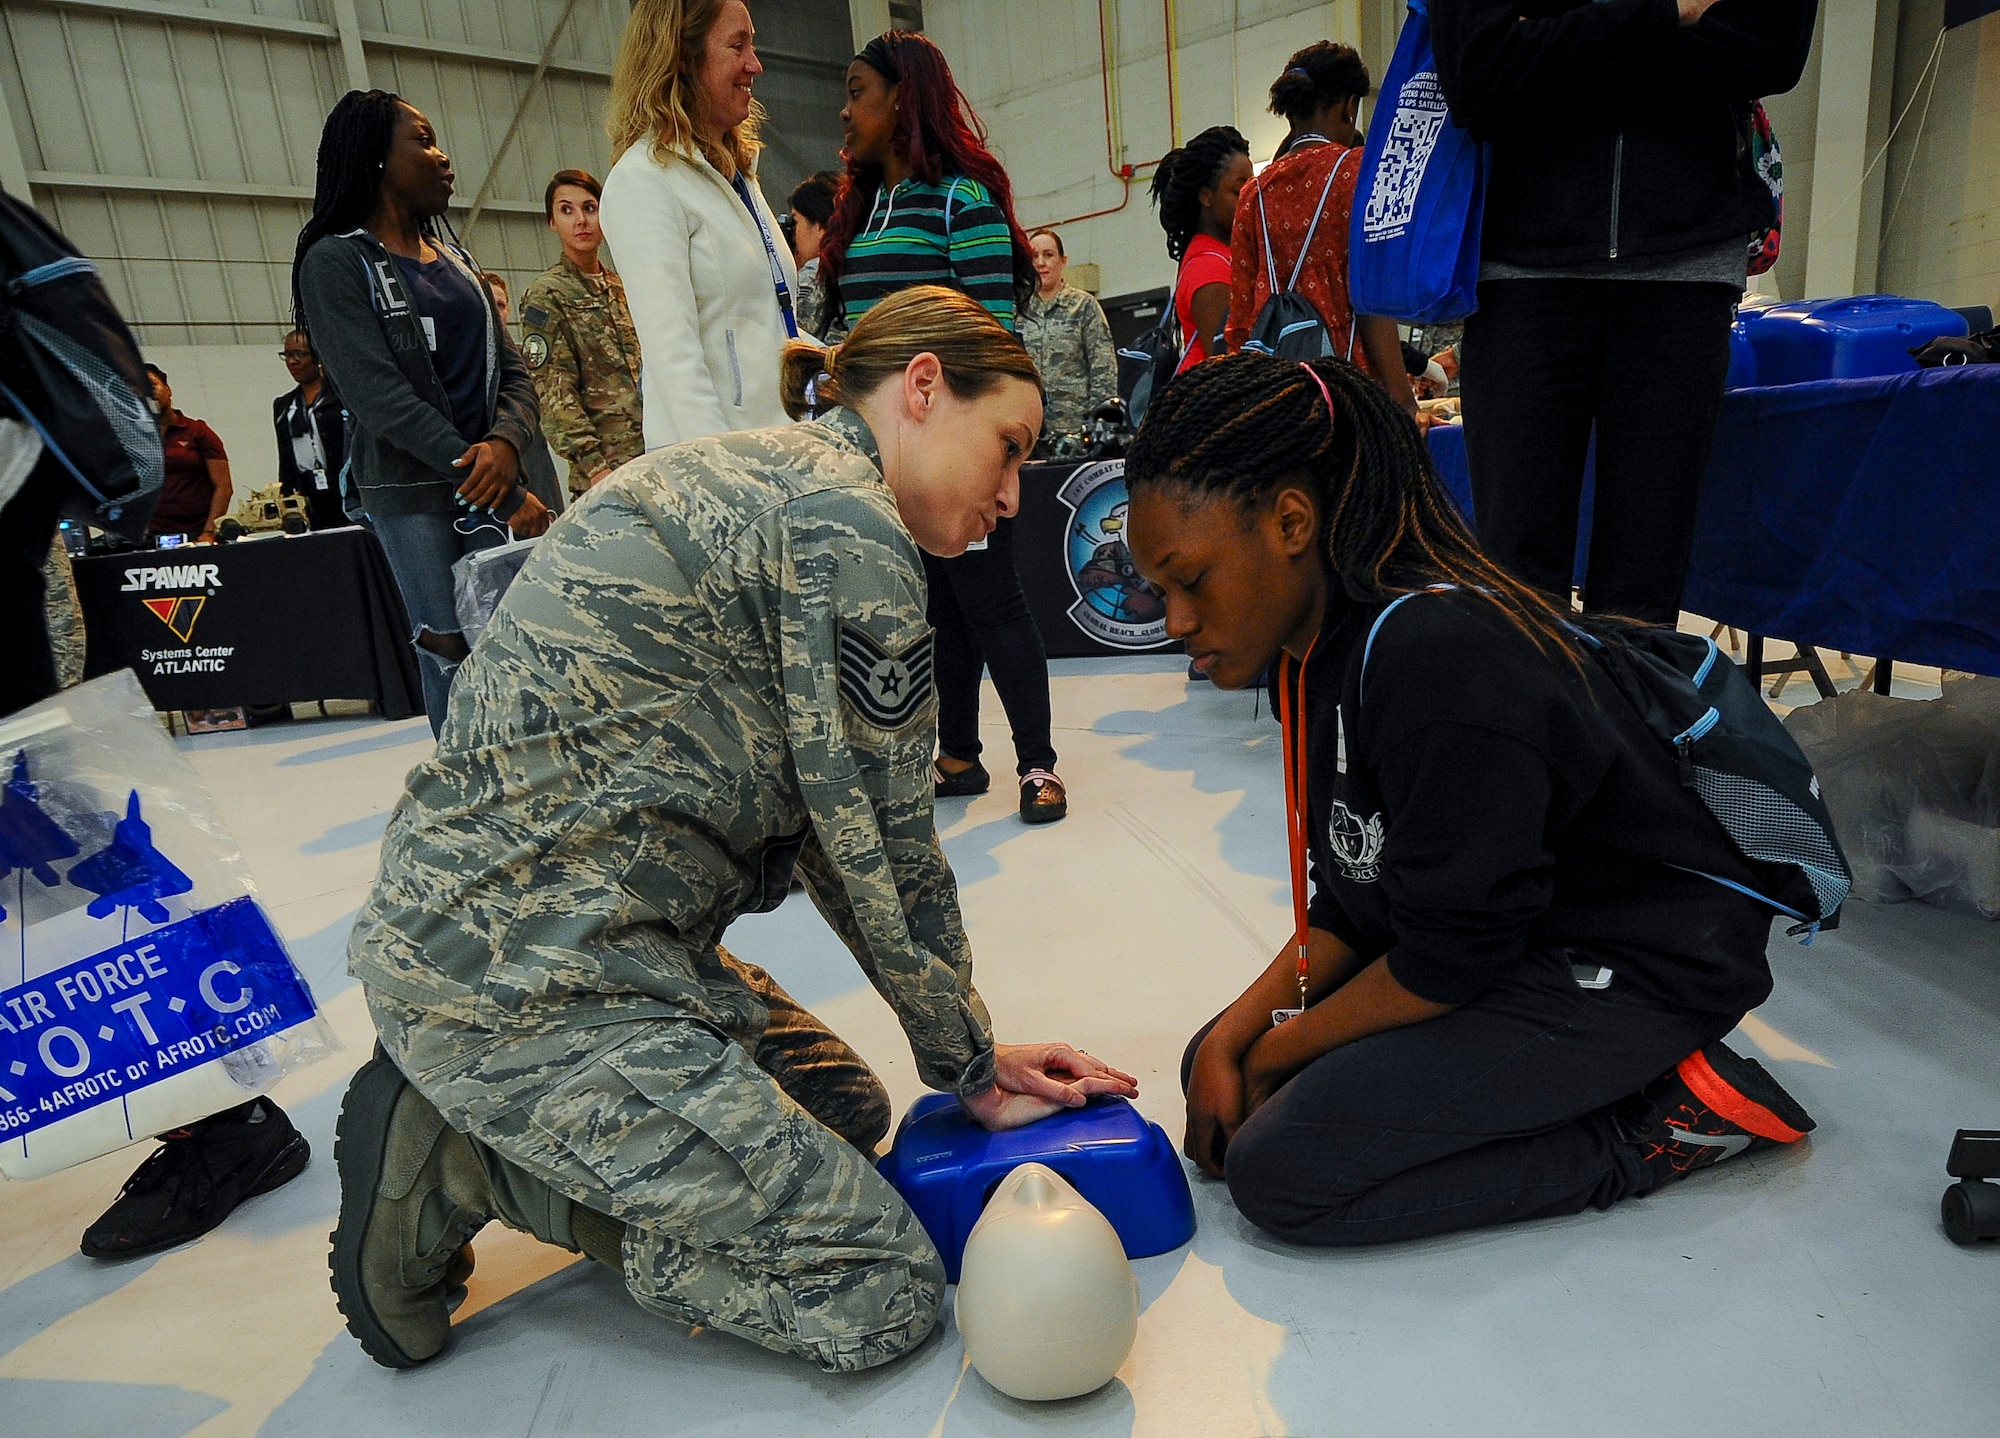 Tech Sgt. Melanie Frederick, 315th Aerospace Medicine Squadron, shows a local student how basic CPR check compressions are done at the 10th Annual Joint Base Charleston Women in Aviation Career Day March 20 at Joint Base Charleston, S.C.